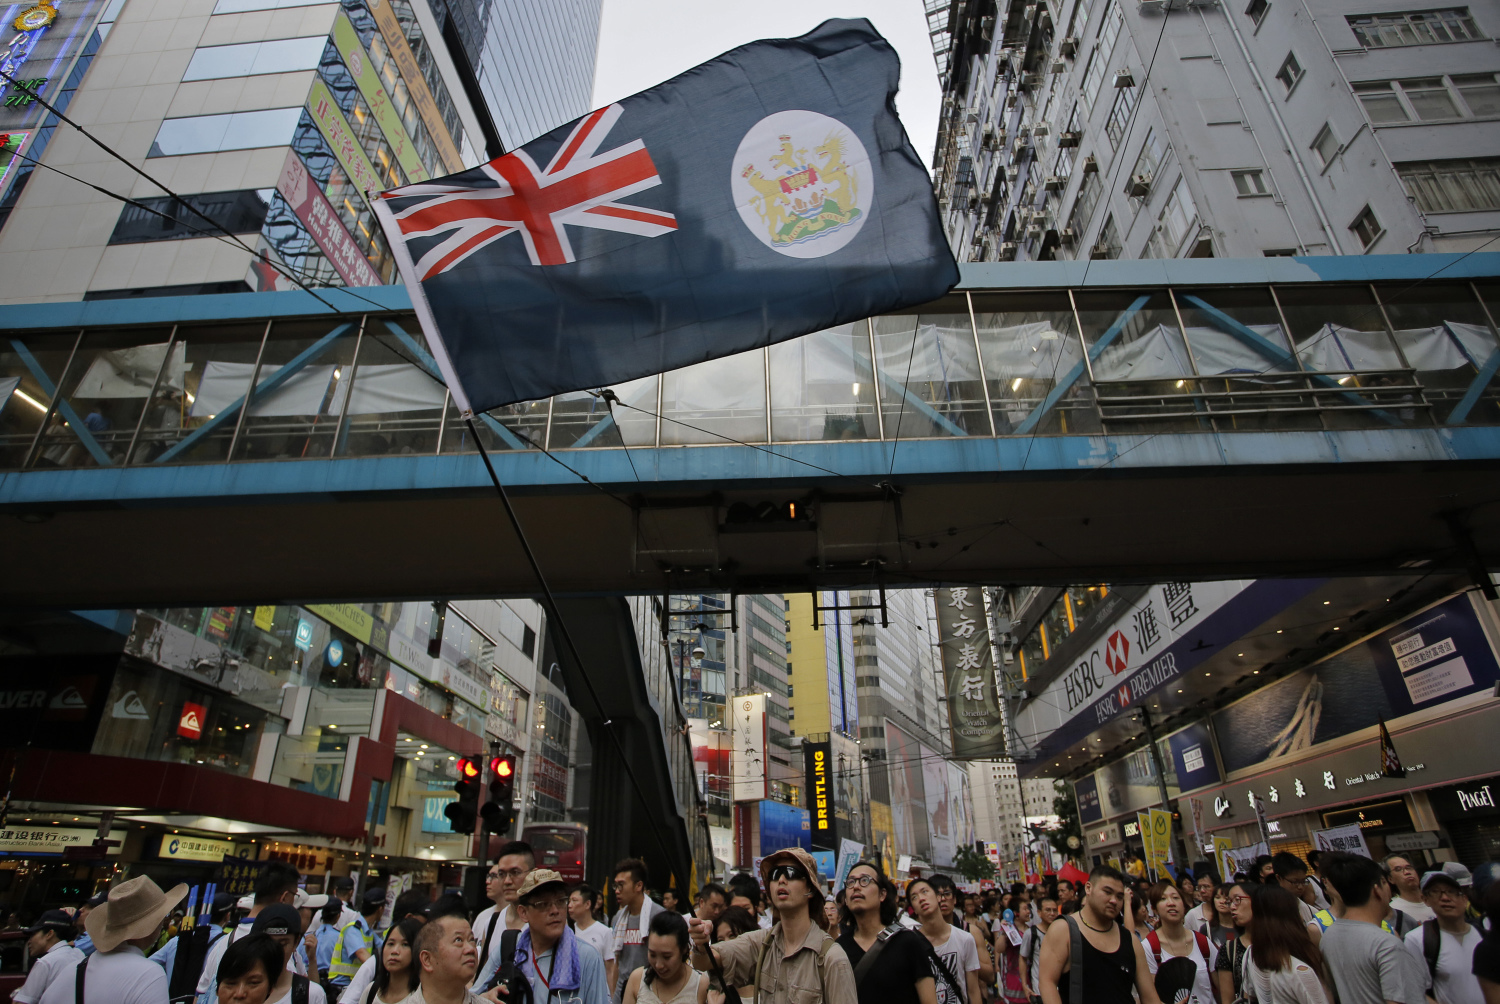 To Beijing's dismay, there are groups advocating "Hong Kong nativism" and unfurling British colonial flags at protests. Photo: AP